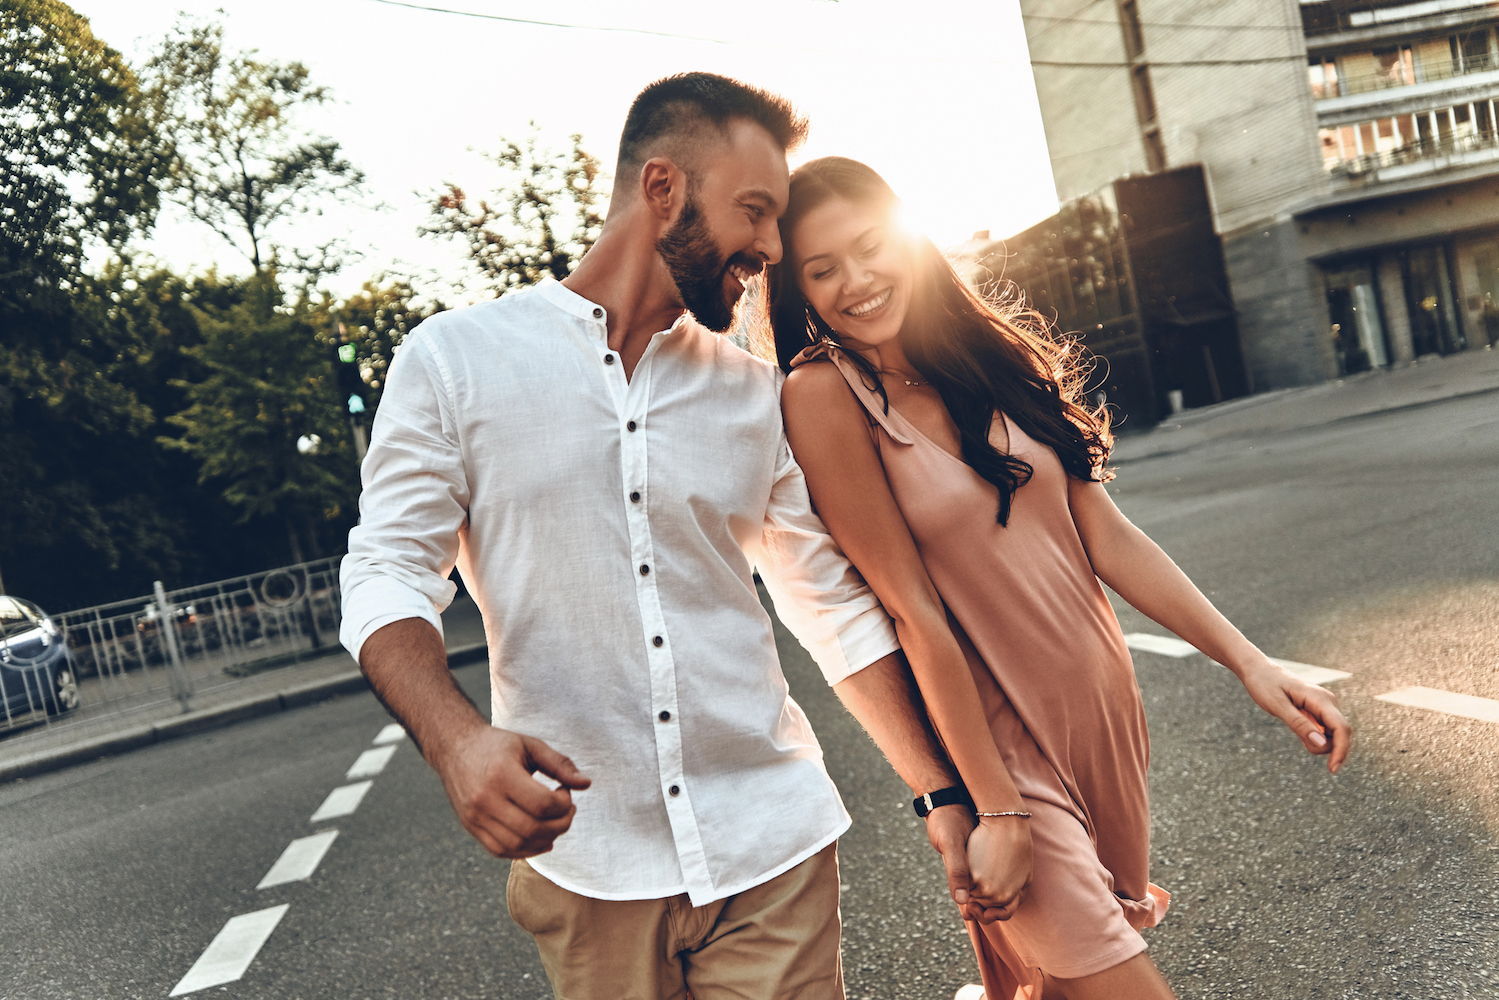 An attractive latin couple wearing comfortable summer clothing walk on a sidewalk smiling to eachother.